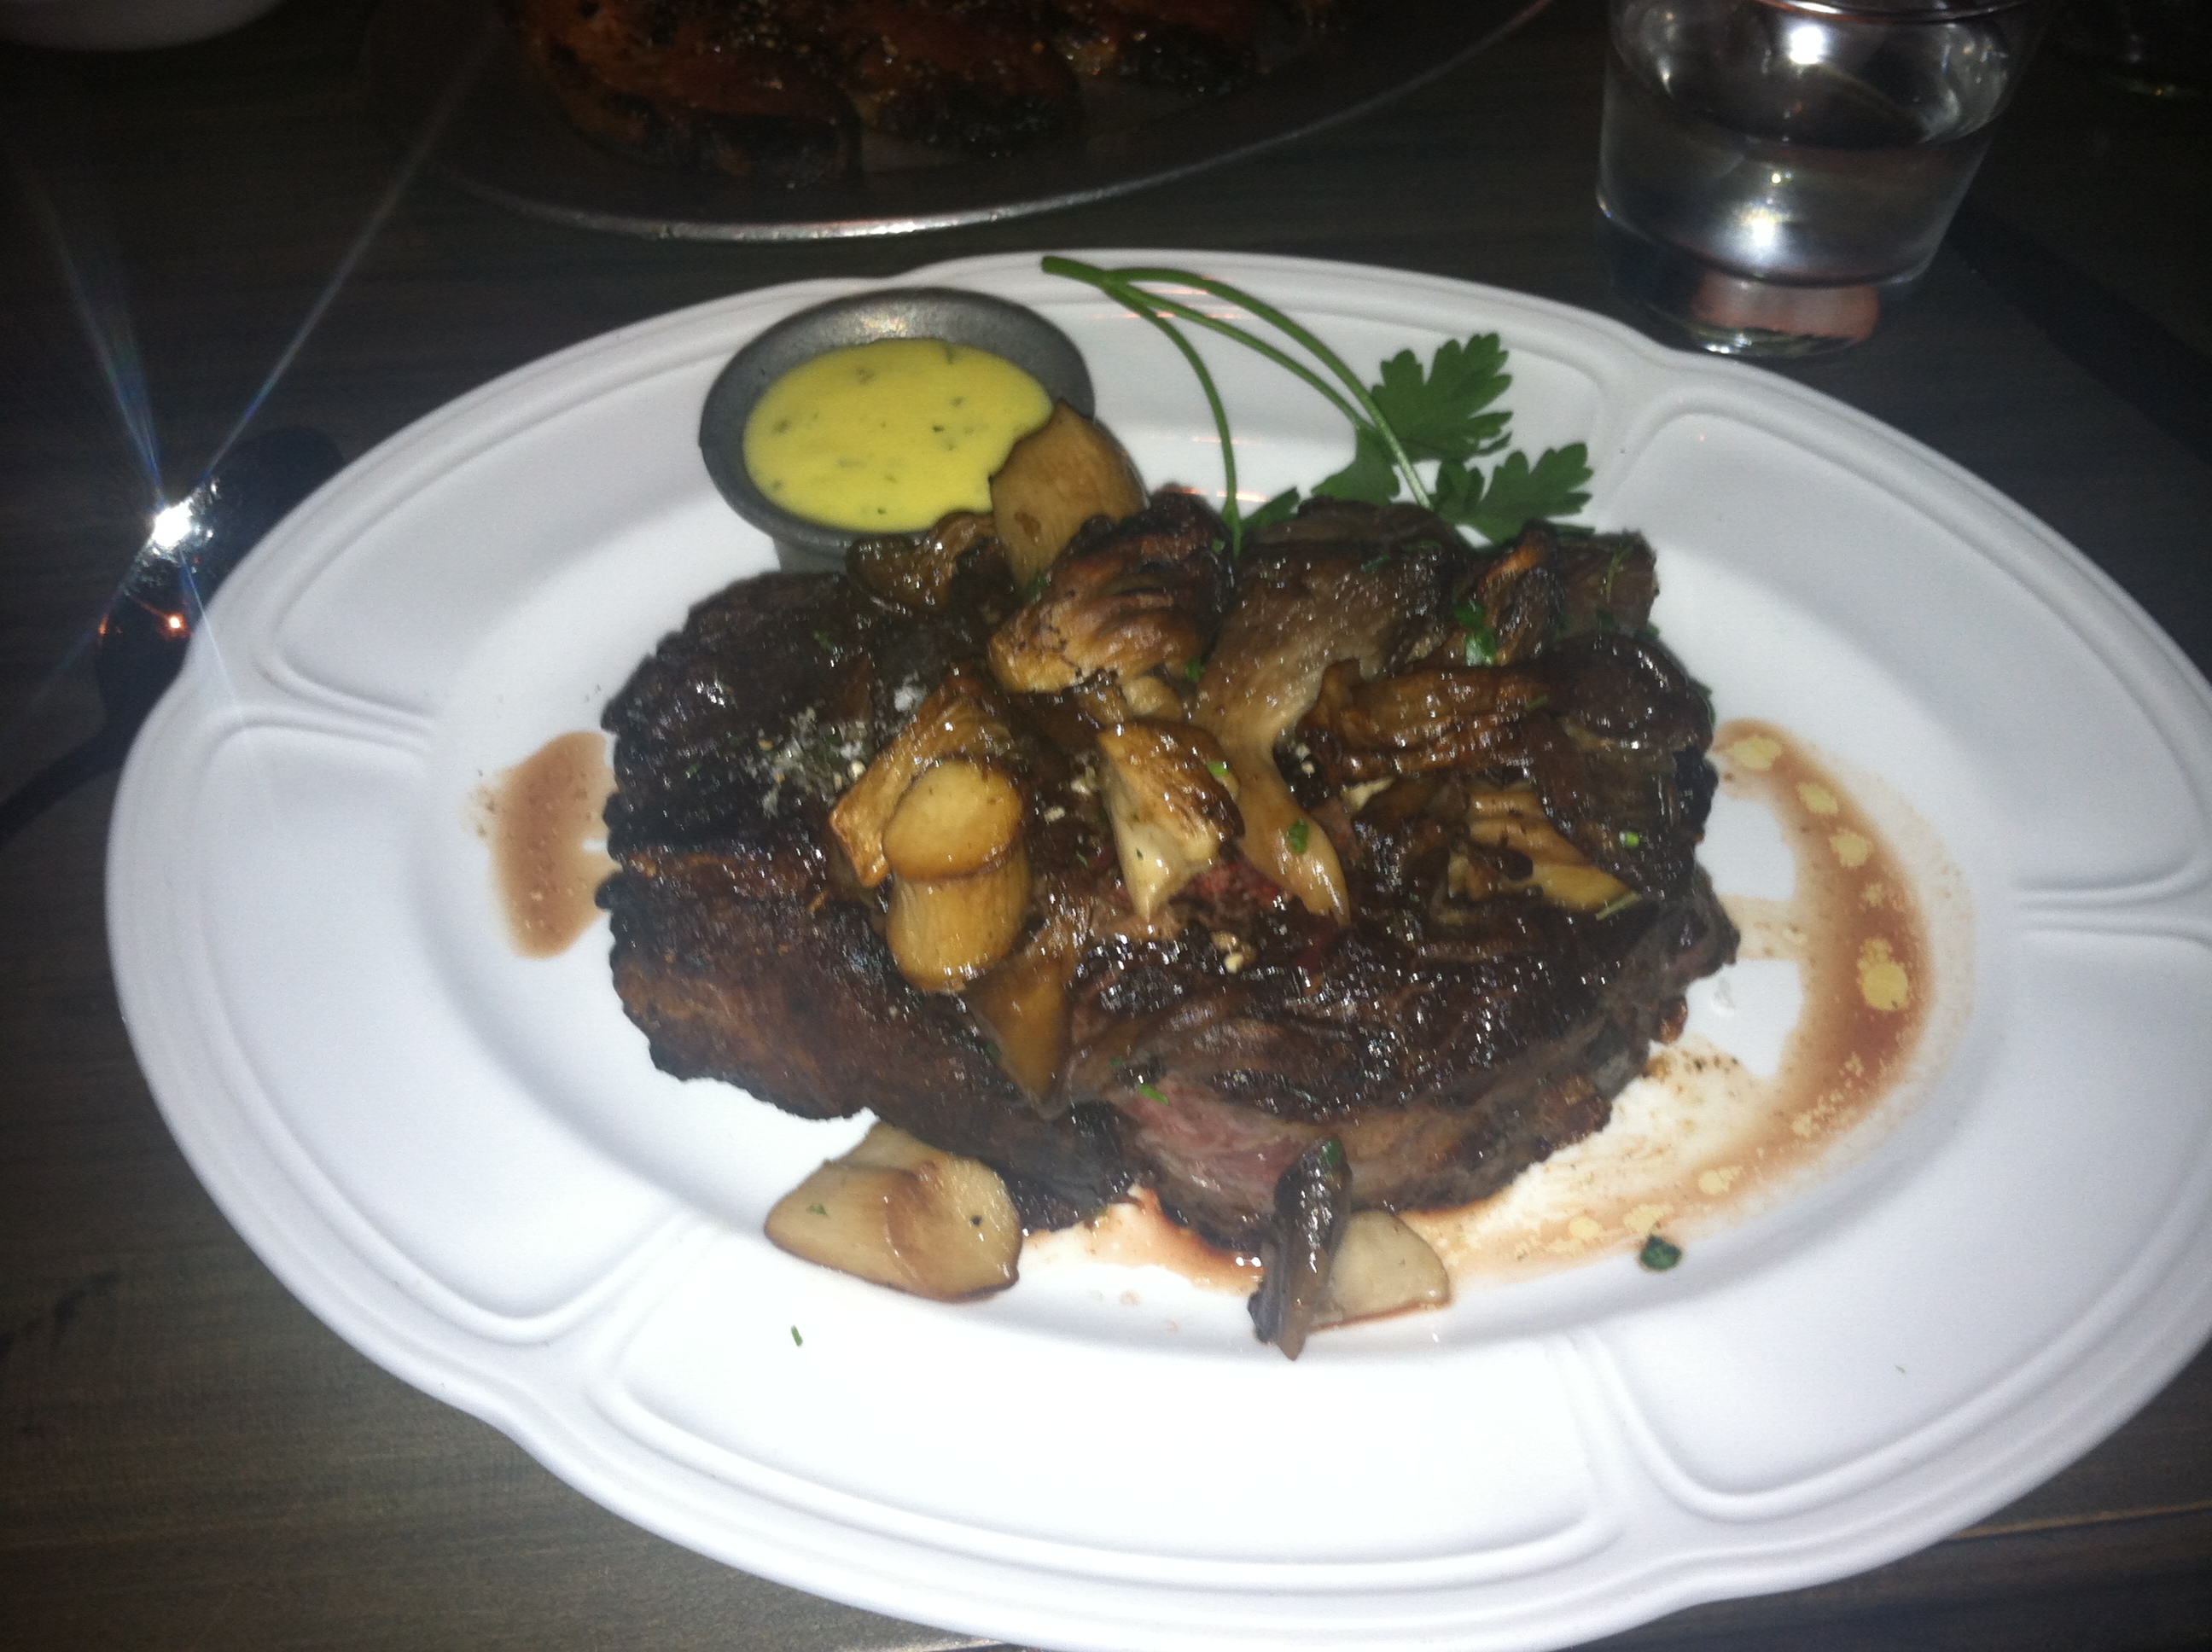 The Chicago Cut Steak with Mushrooms